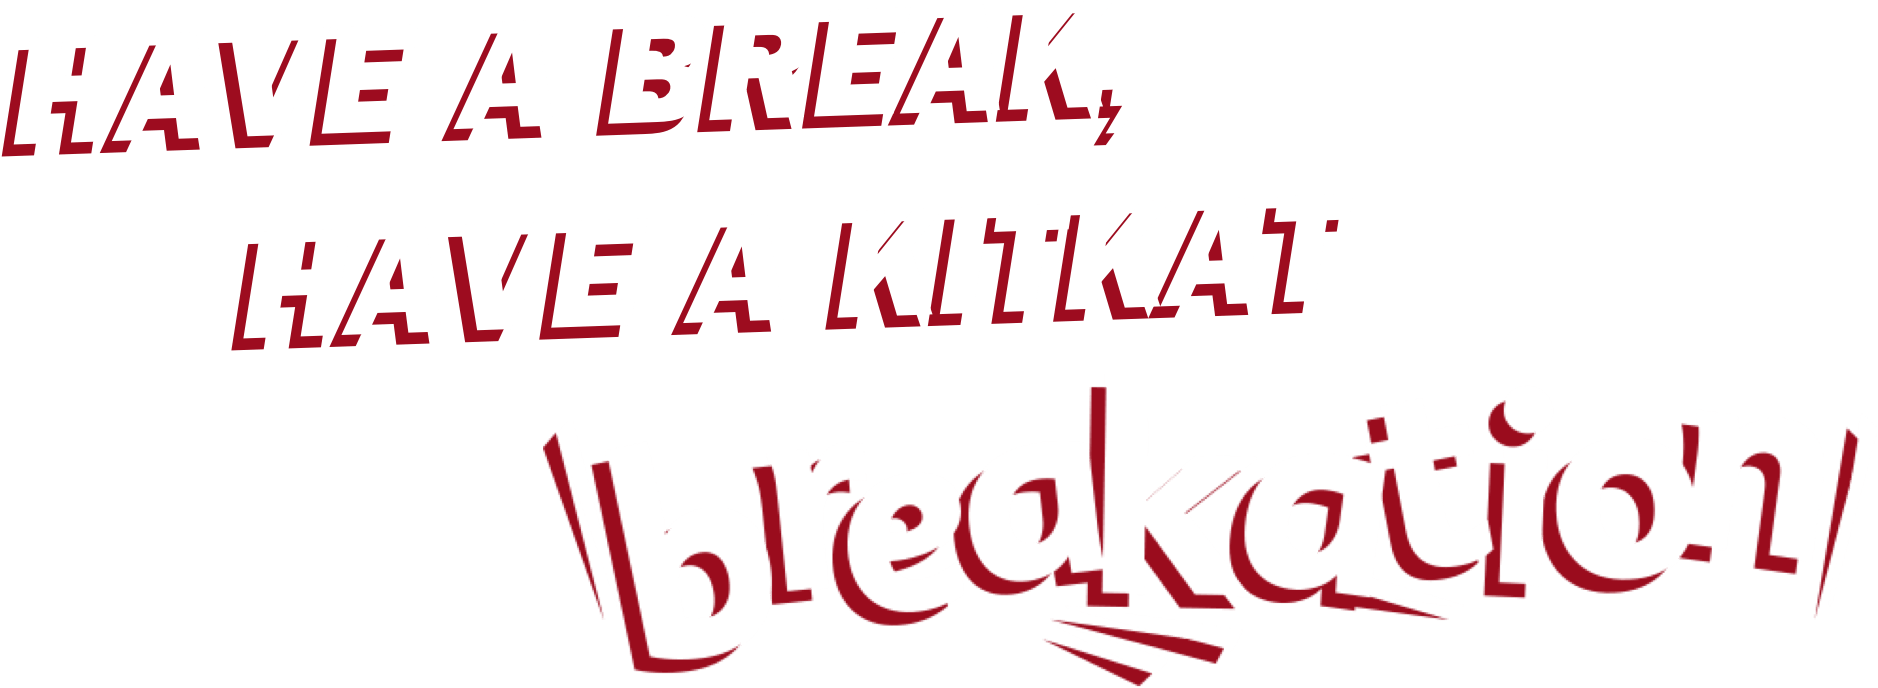 Have a break, have a KITKAT breakation